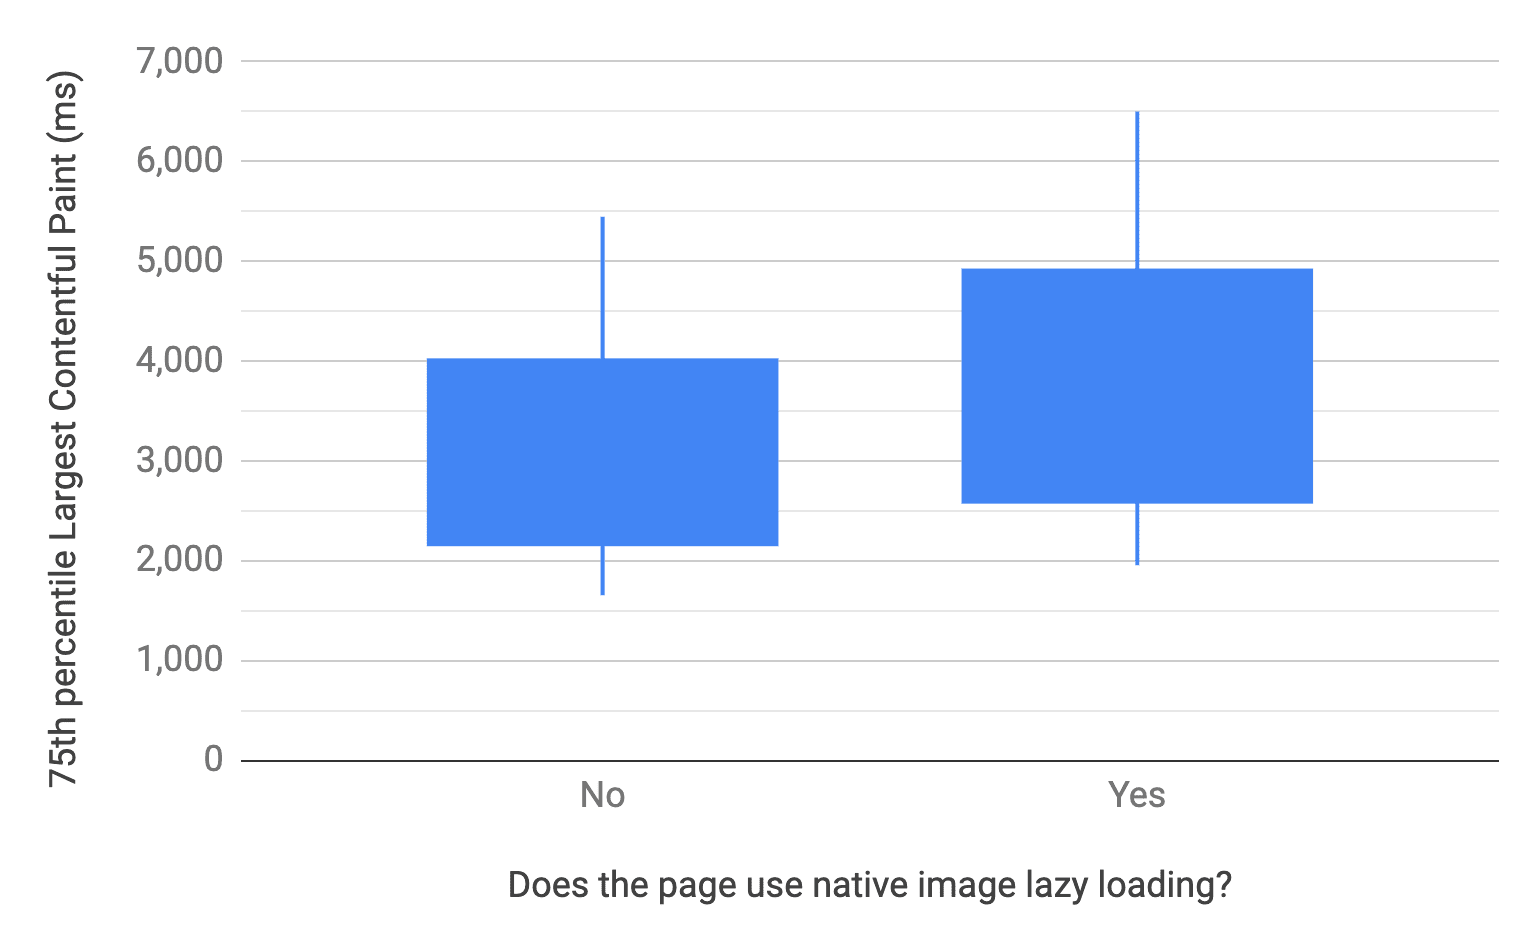 Box and whisker chart showing the 10, 25, 75, and 90th percentiles for pages that do and do not use browser-level image lazy loading. Comparatively, the LCP distribution of pages that do not use it is faster than those that do.